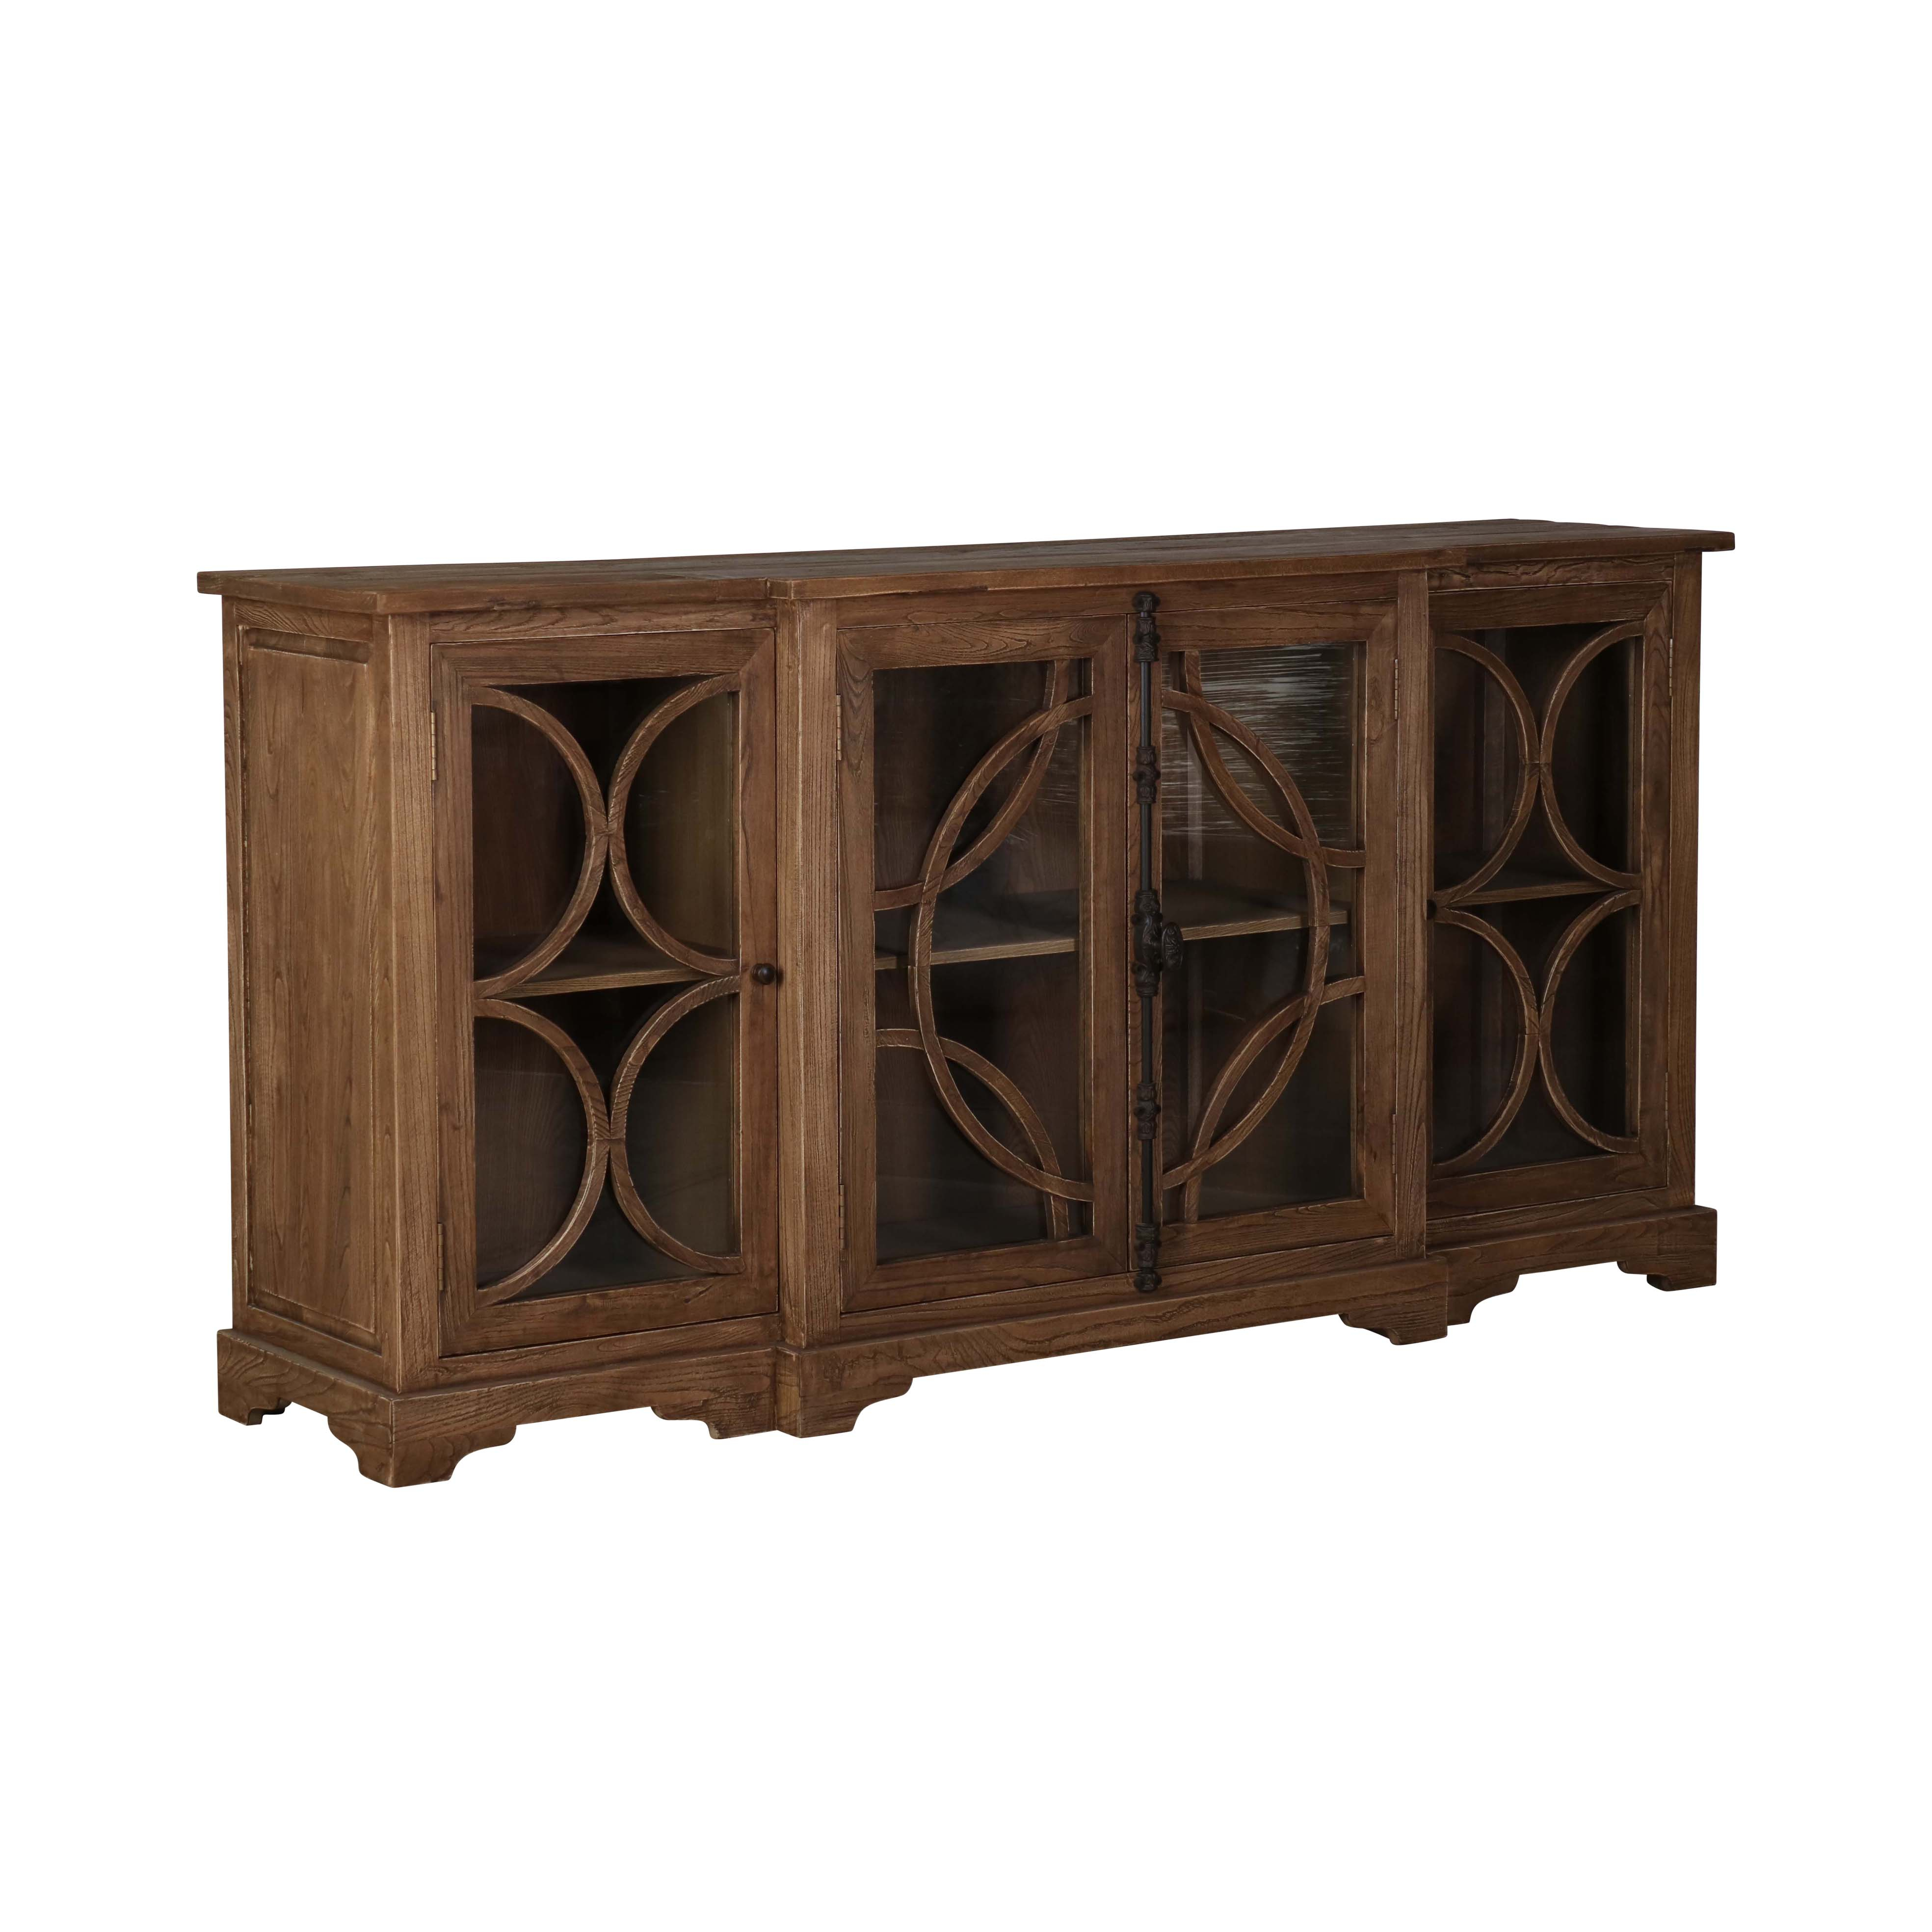 Old elm sideboard with 4 glass doors Château Collection 